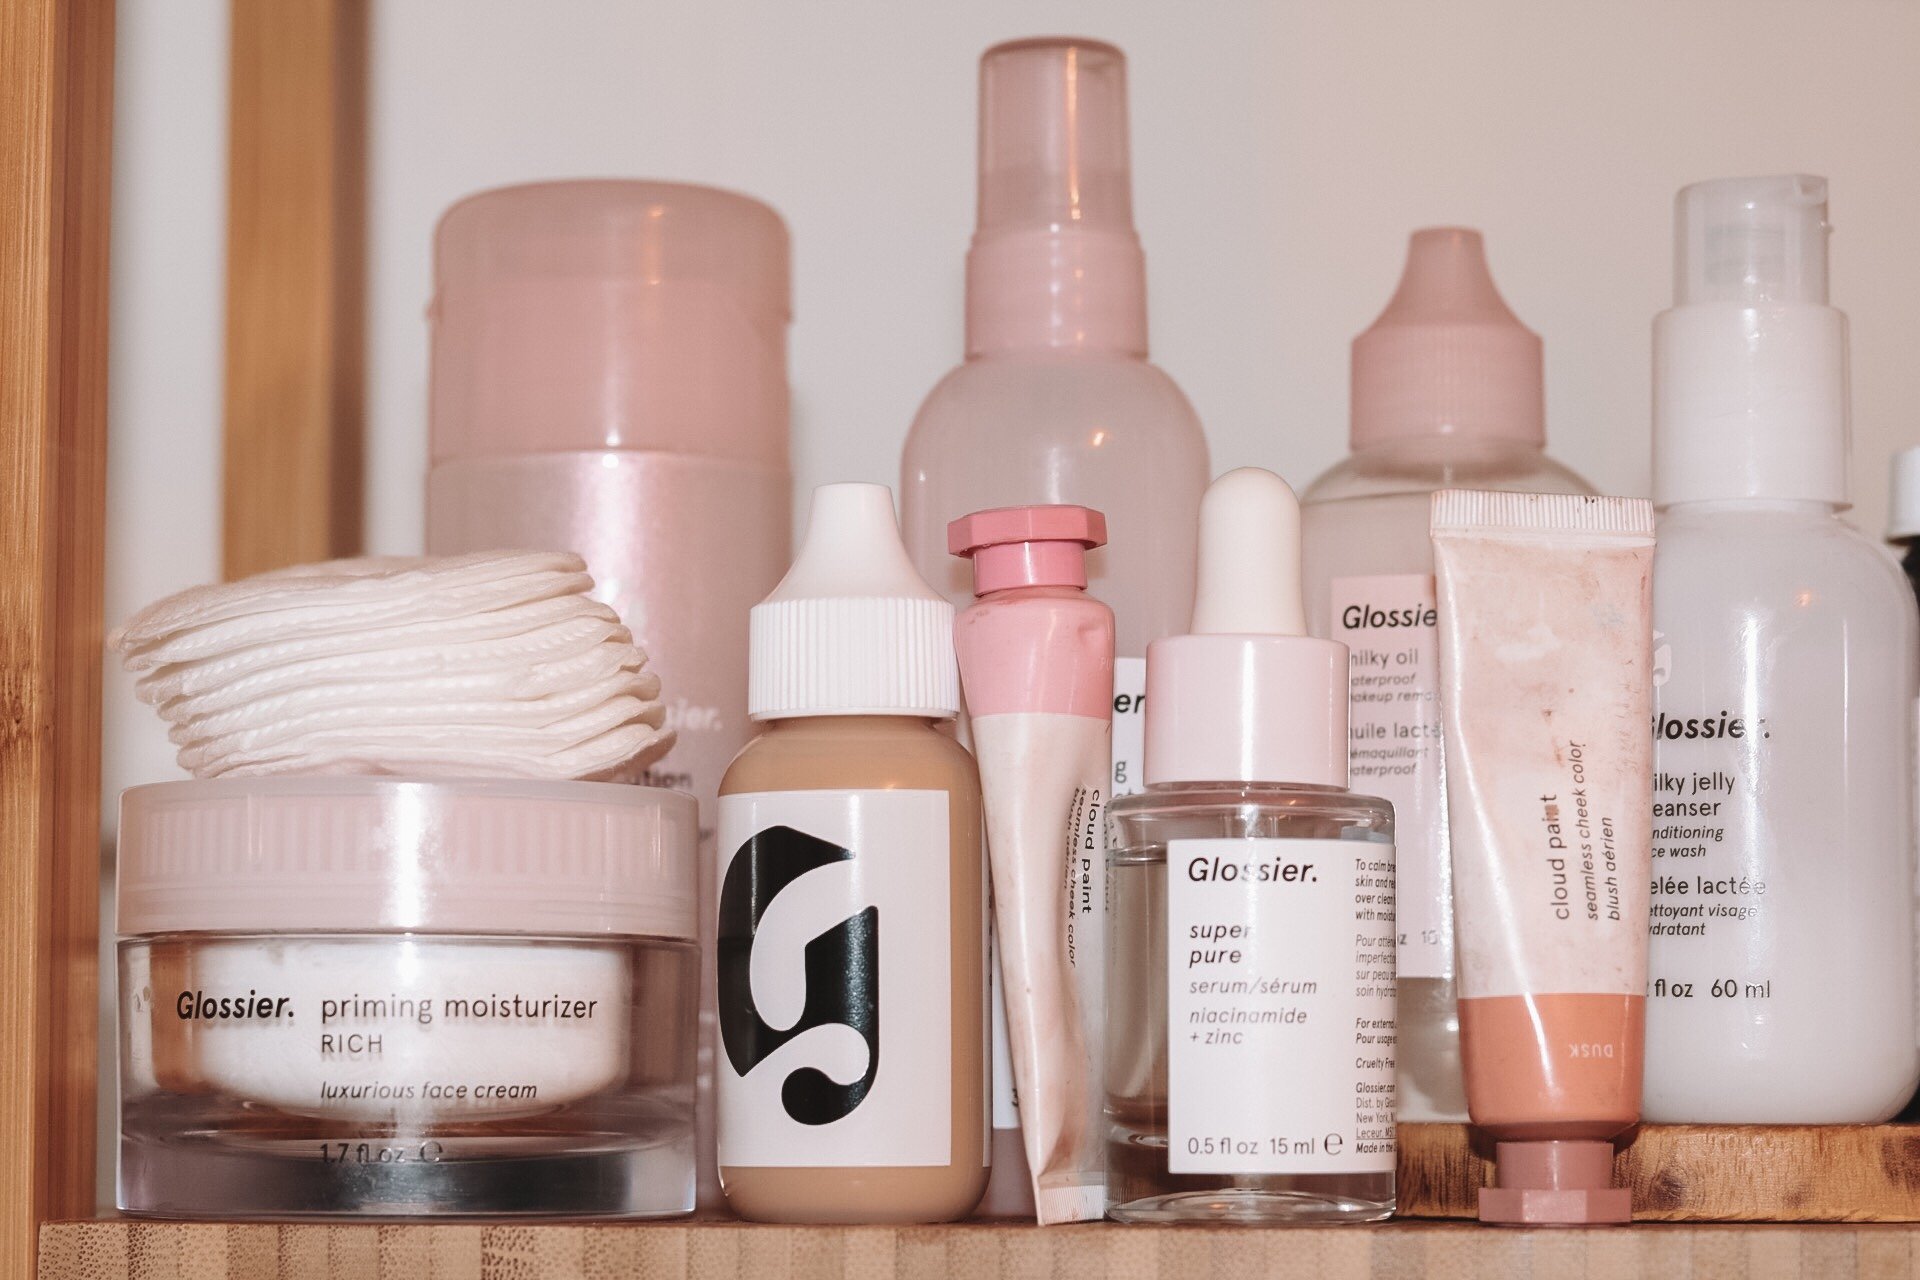 best glossier products discount code 